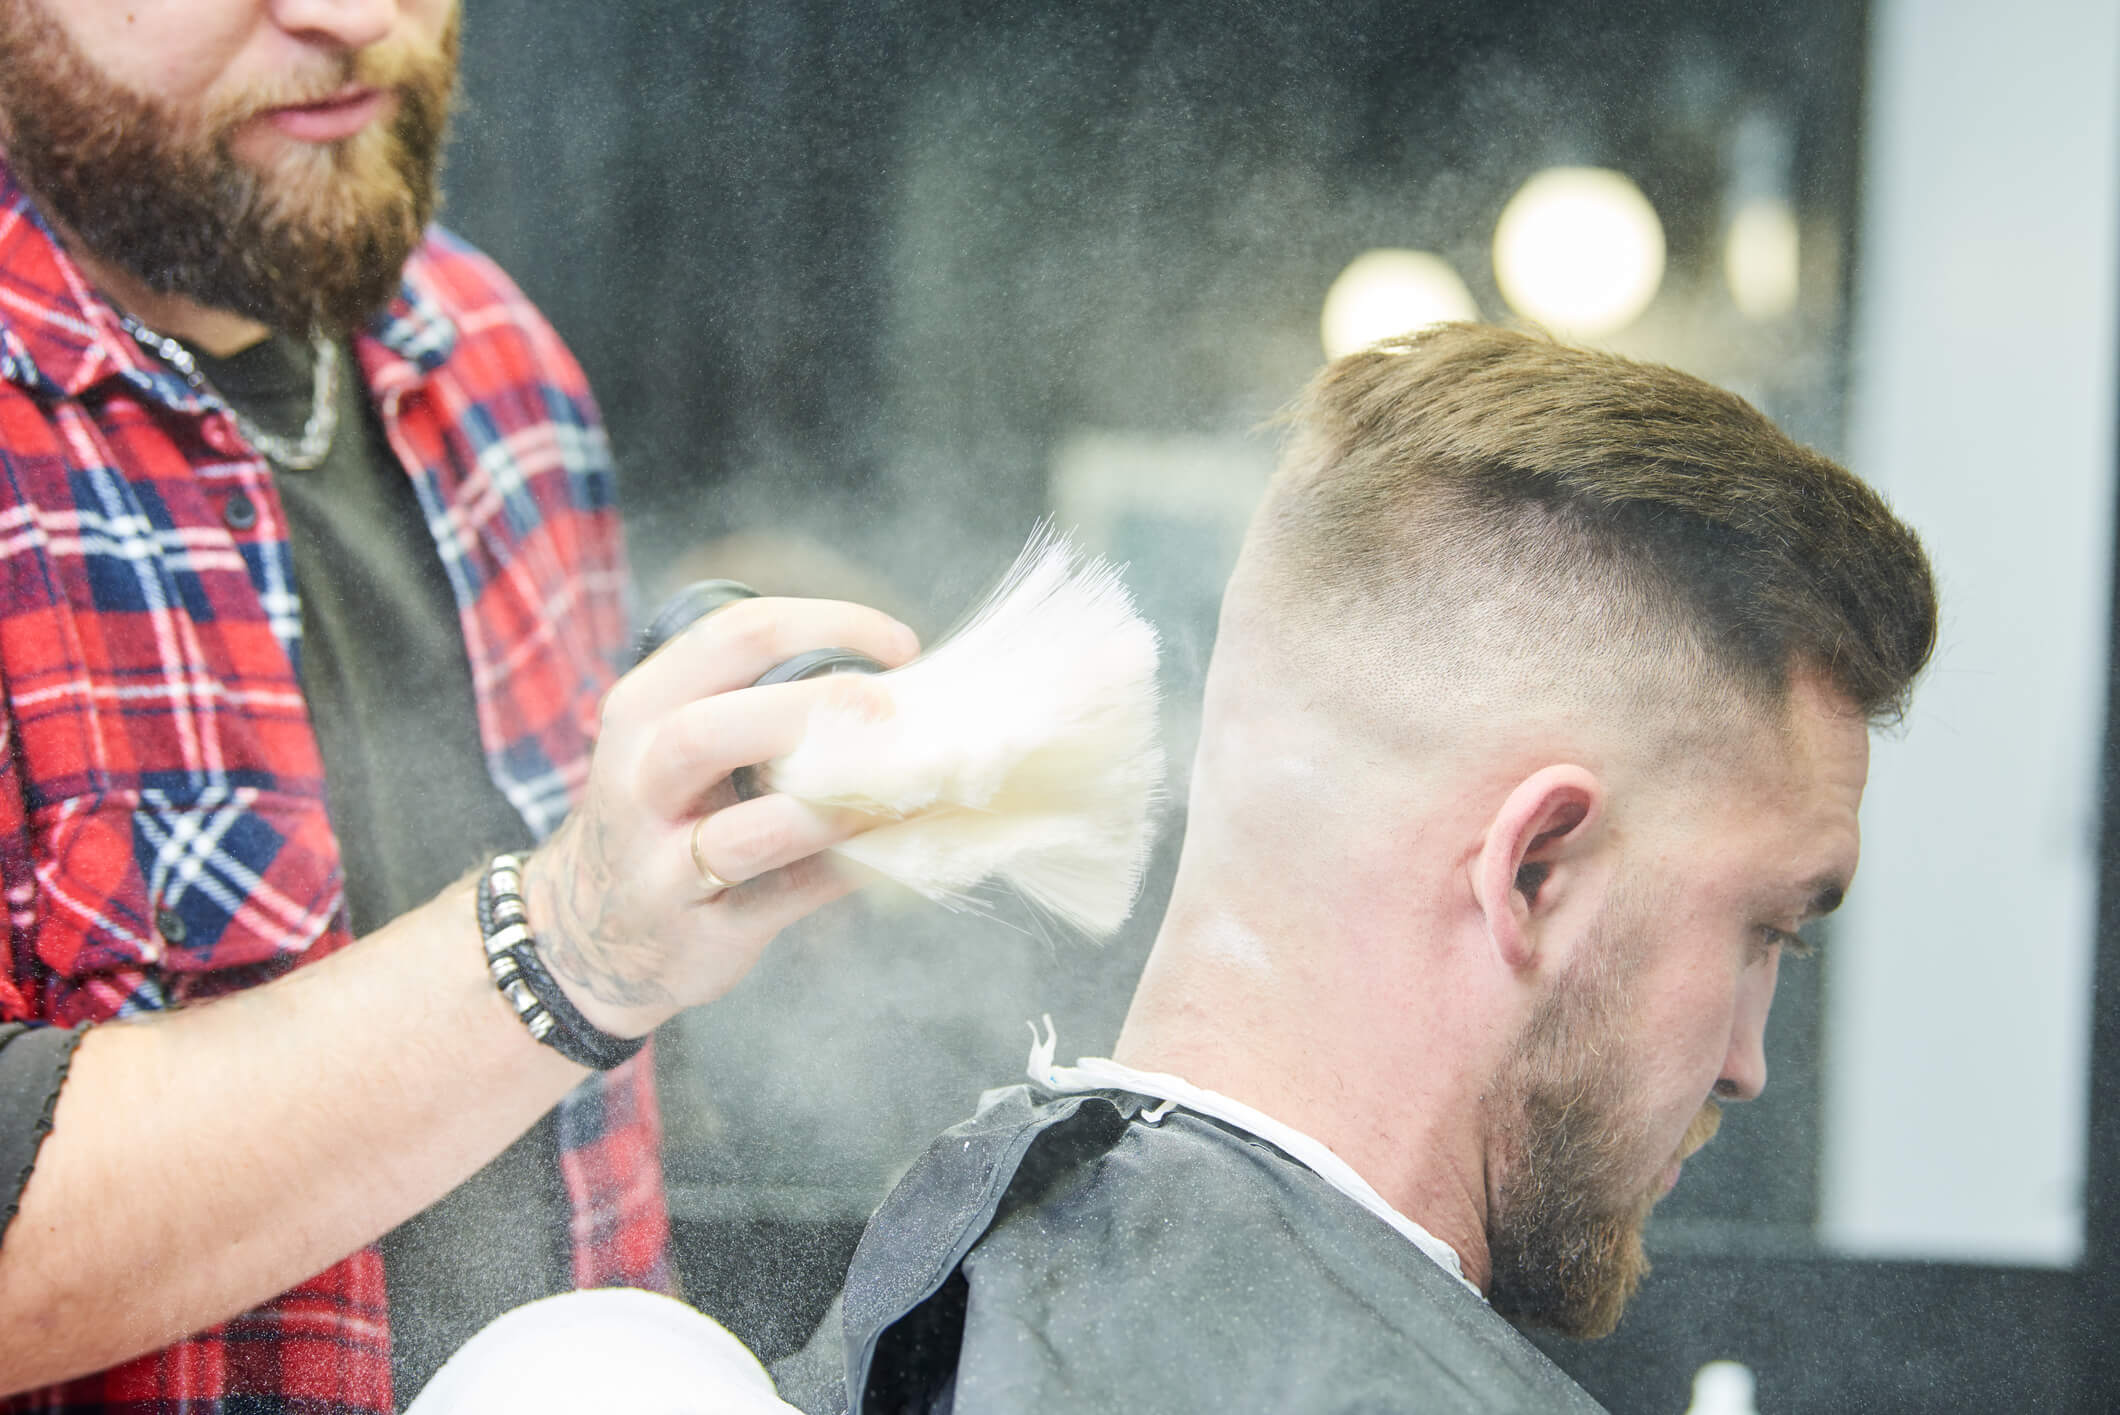 Image of a barber using and applying talc to client